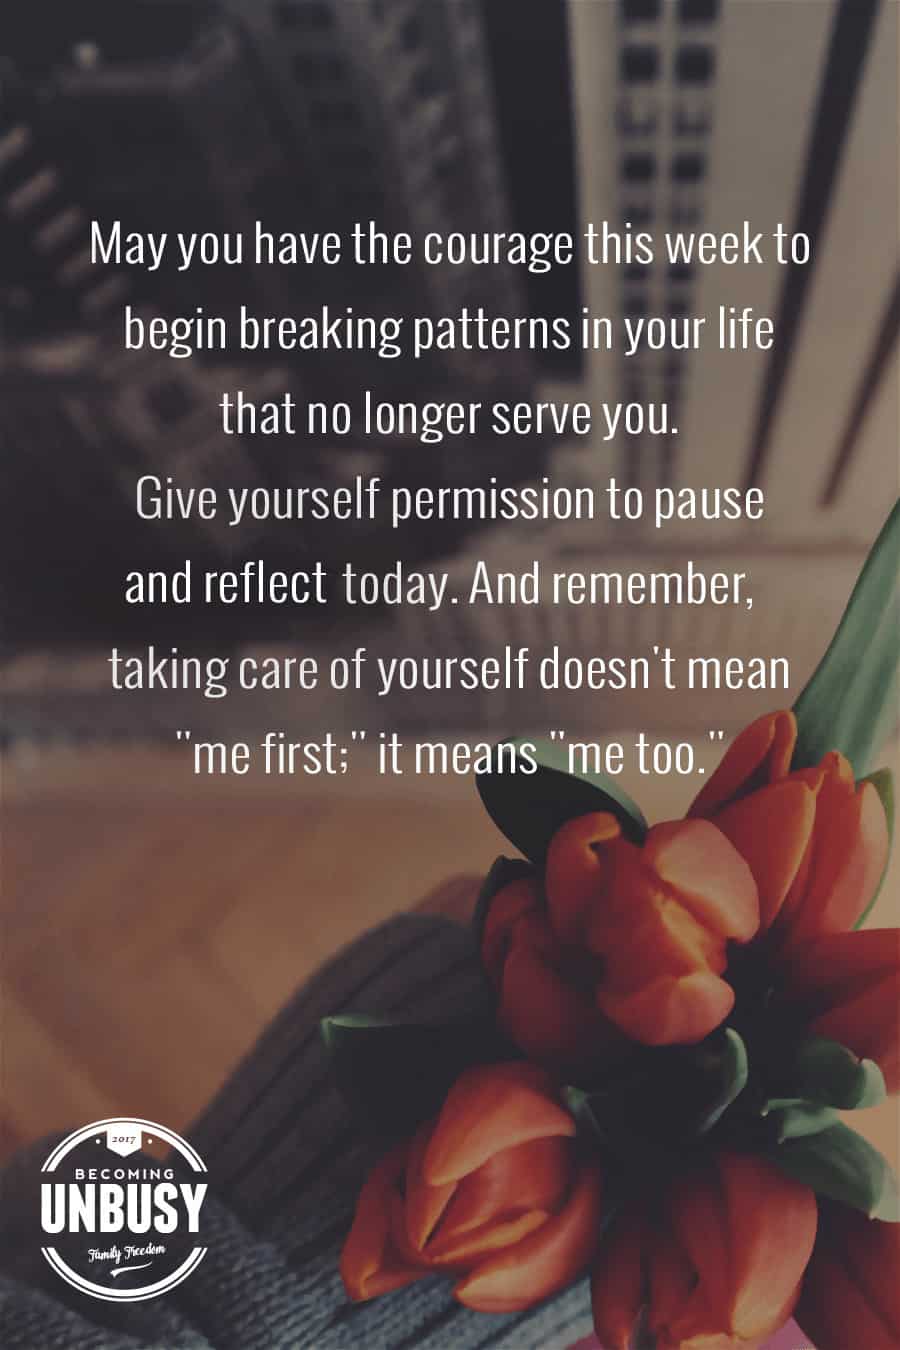 May you have the courage to begin breaking patterns in your life that no longer serve you. To give yourself permission to pause and reflect. And to remember taking care of yourself doesn't mean "me first," it means "me too." *Love this quote and this Becoming UnBusy website